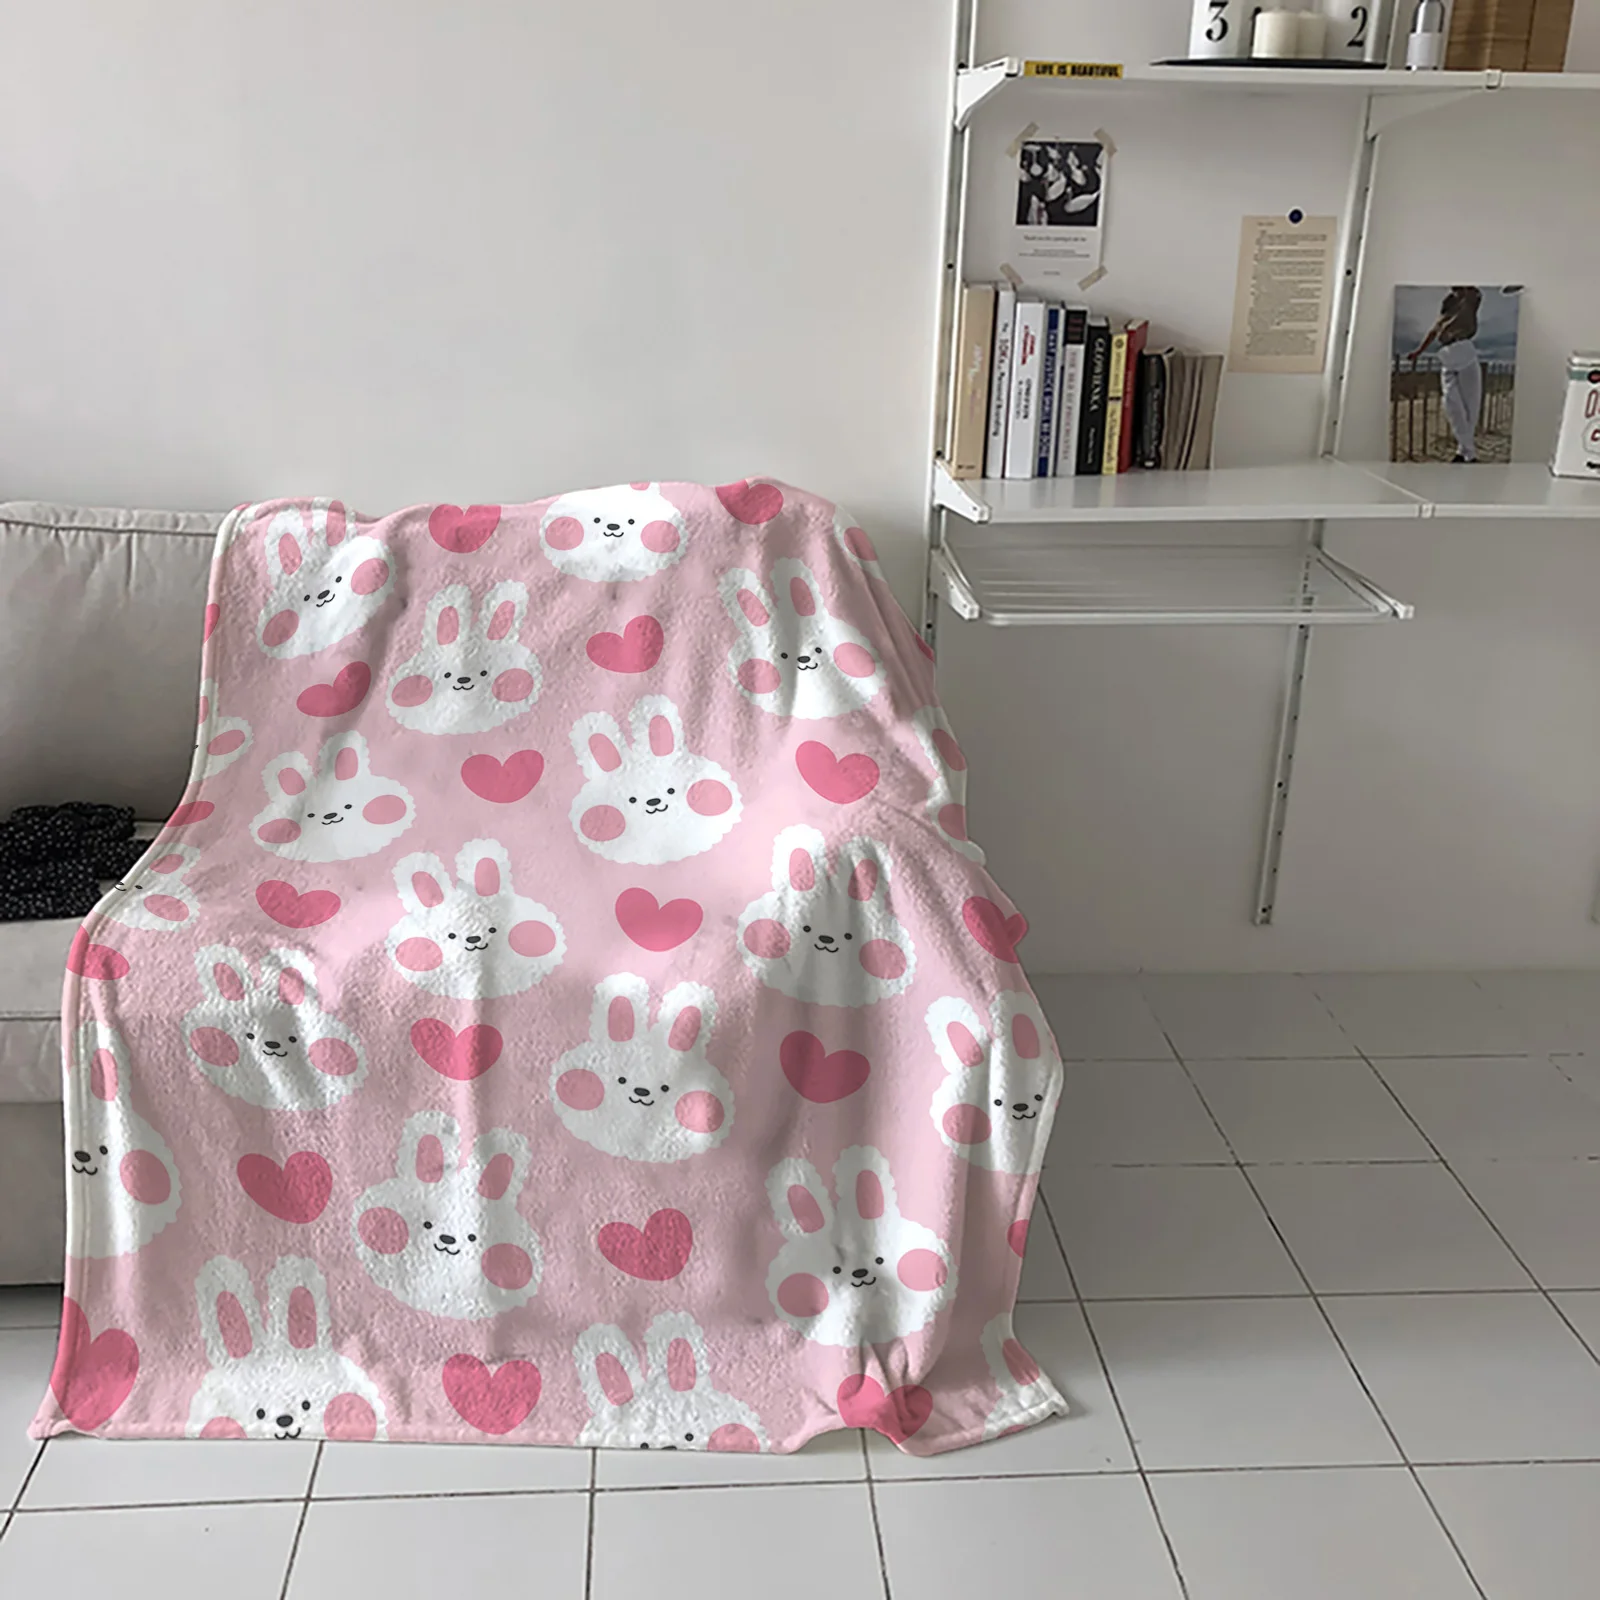 

Easter Pink Bunny Love Throw Blanket for Sofa Bed Soft Microfiber Flannel Blanket for Travelling Camping